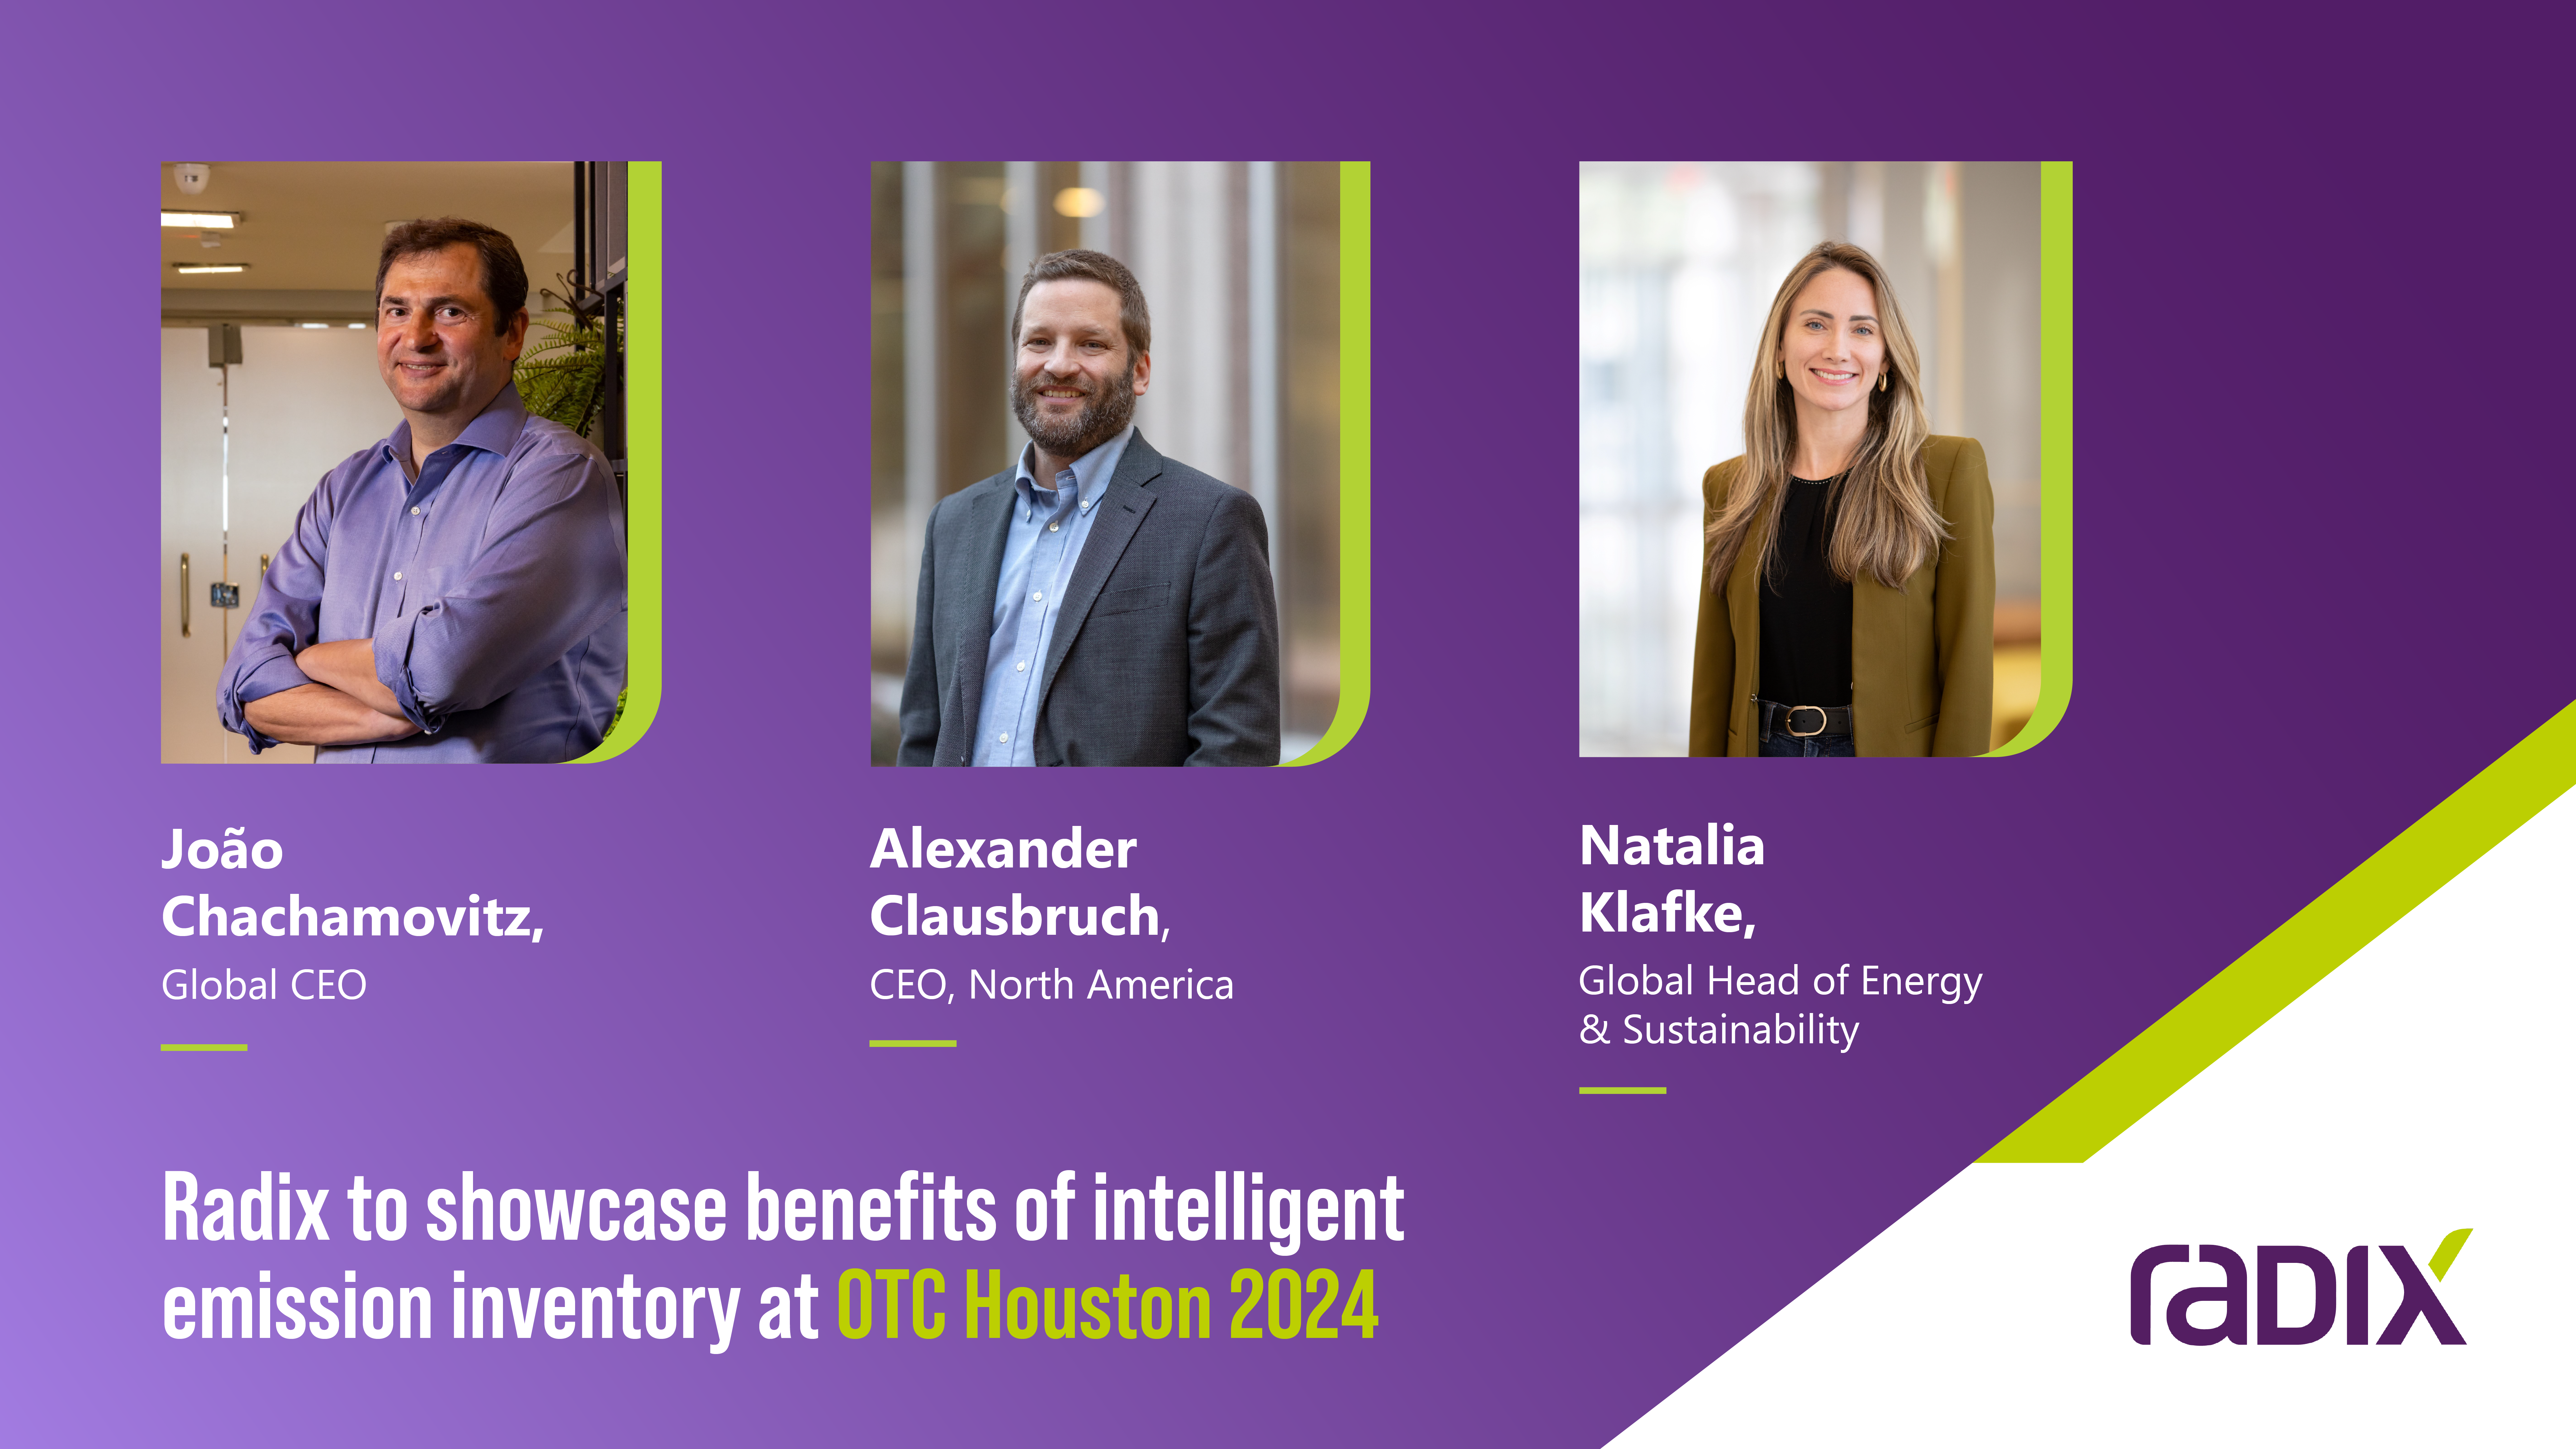 The Radix delegation at OTC 2024 will be led by its Global CEO, João Chachamovitz, North America CEO, Alexander Clausbruch and Global Head of Energy and Sustainability, Natalia Klafke.